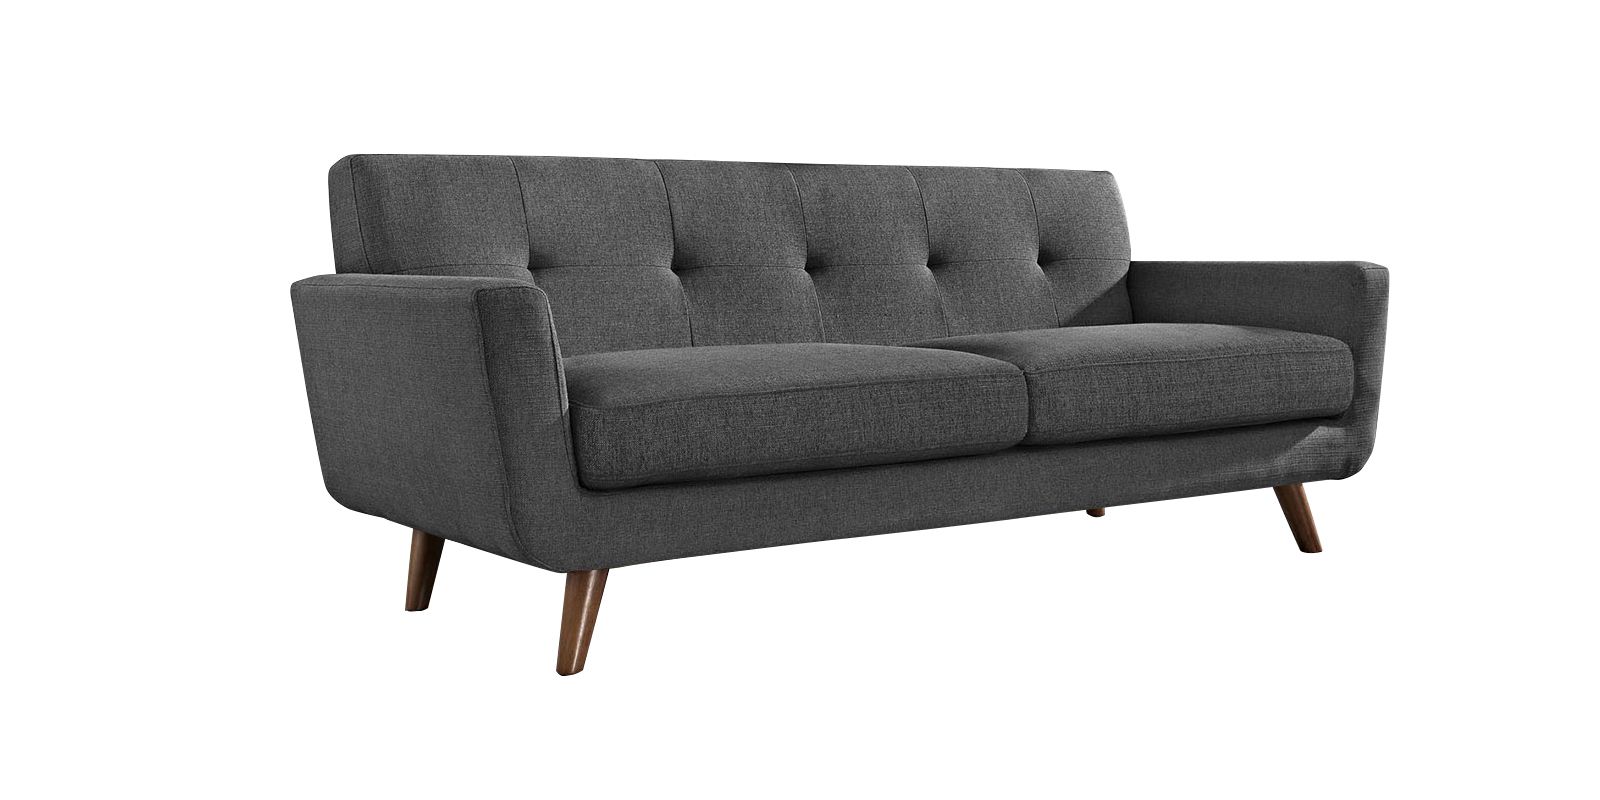 Mid Century Classic 3 Seater Sofa In Grey Colour – Dreamzz Furniture |  Online Furniture Shop Pertaining To Mid Century 3 Seat Couches (View 7 of 15)